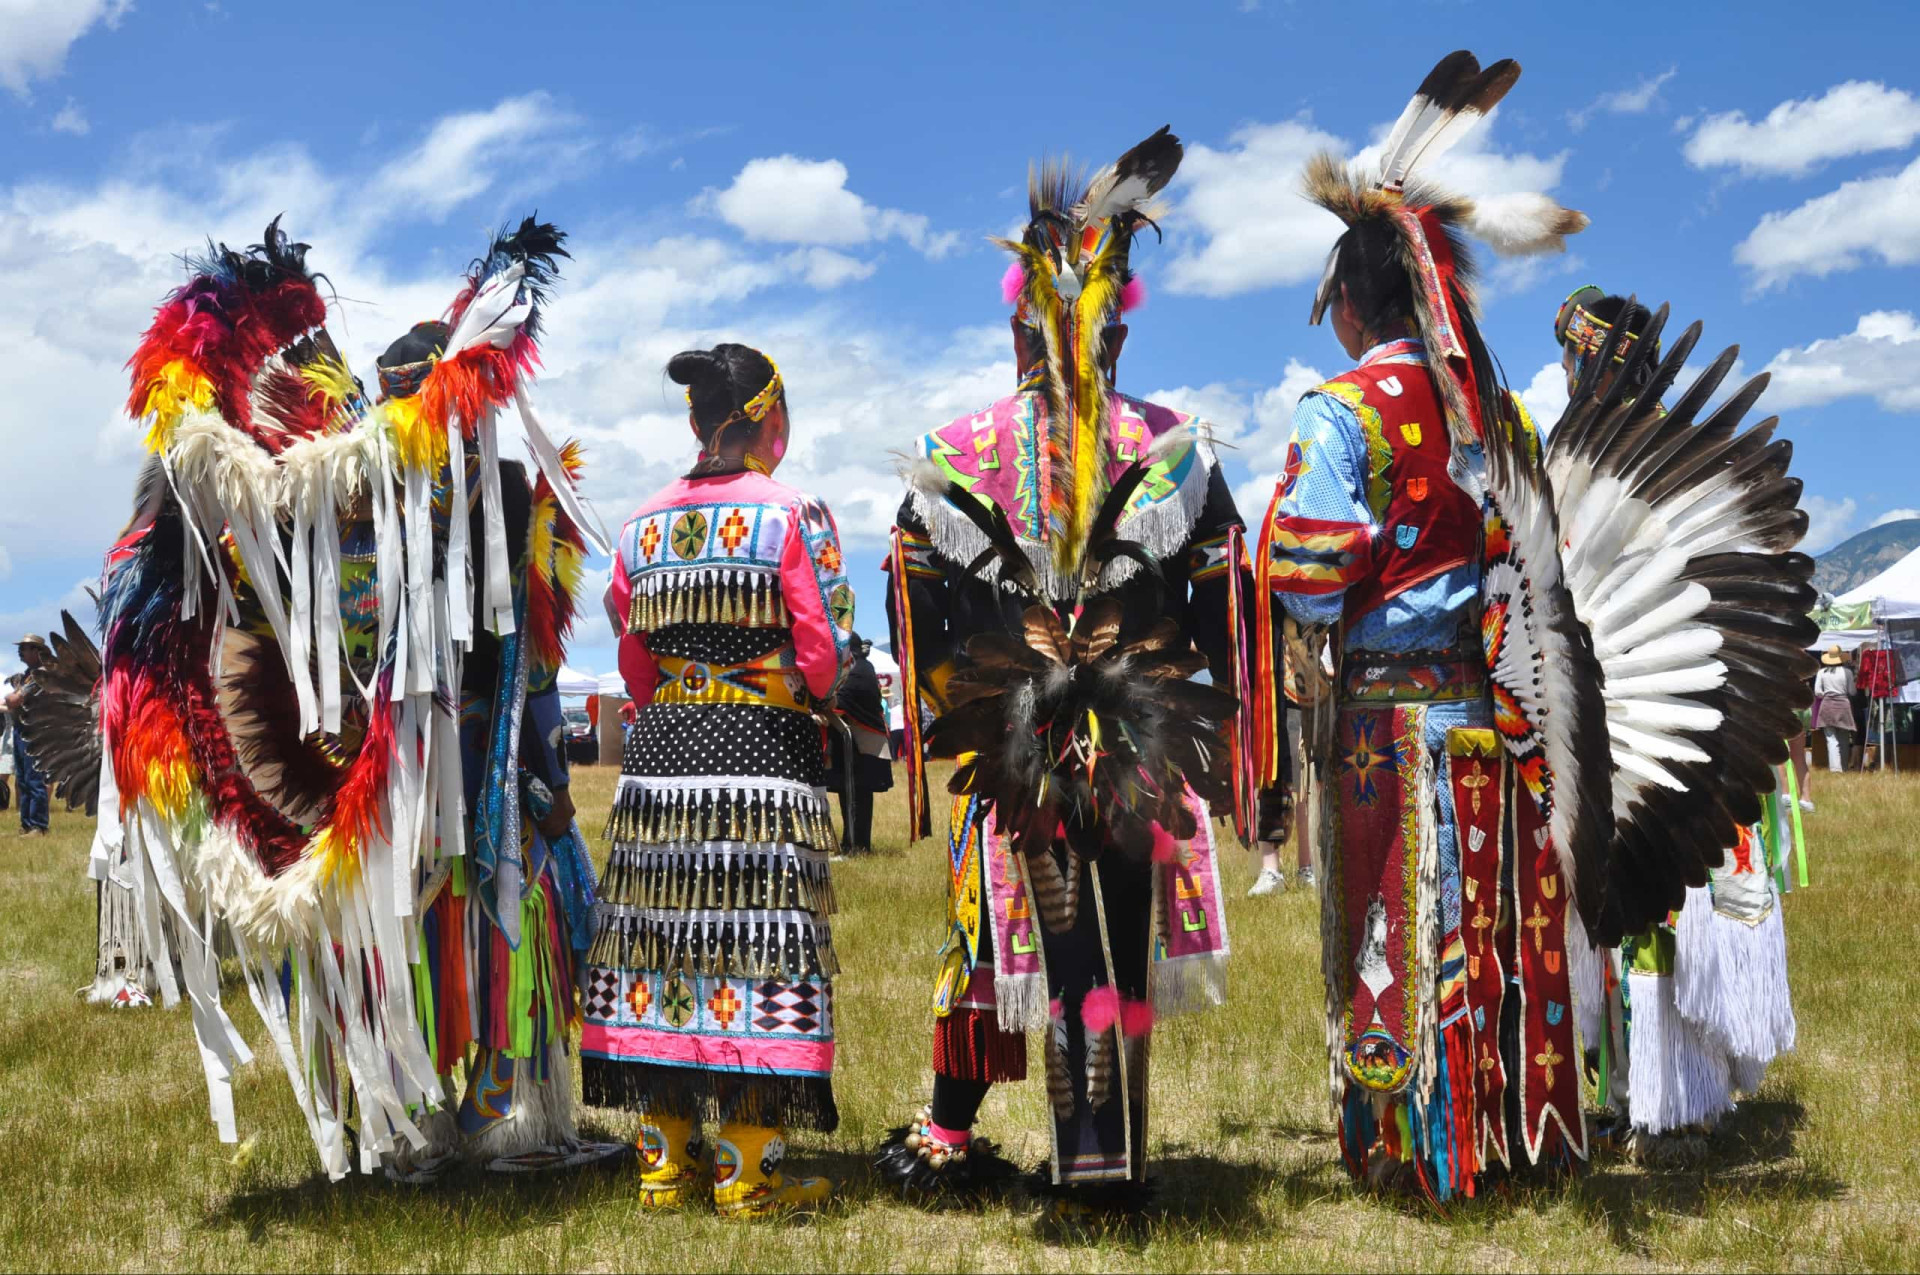 <p>The annual summer event at Taos Pueblo is the colorful Taos Pow Wow. This is one of the country's largest gathering of Indian Nations and features authentic Native American dancing and drumming contests.</p><p>You may also like: </p>